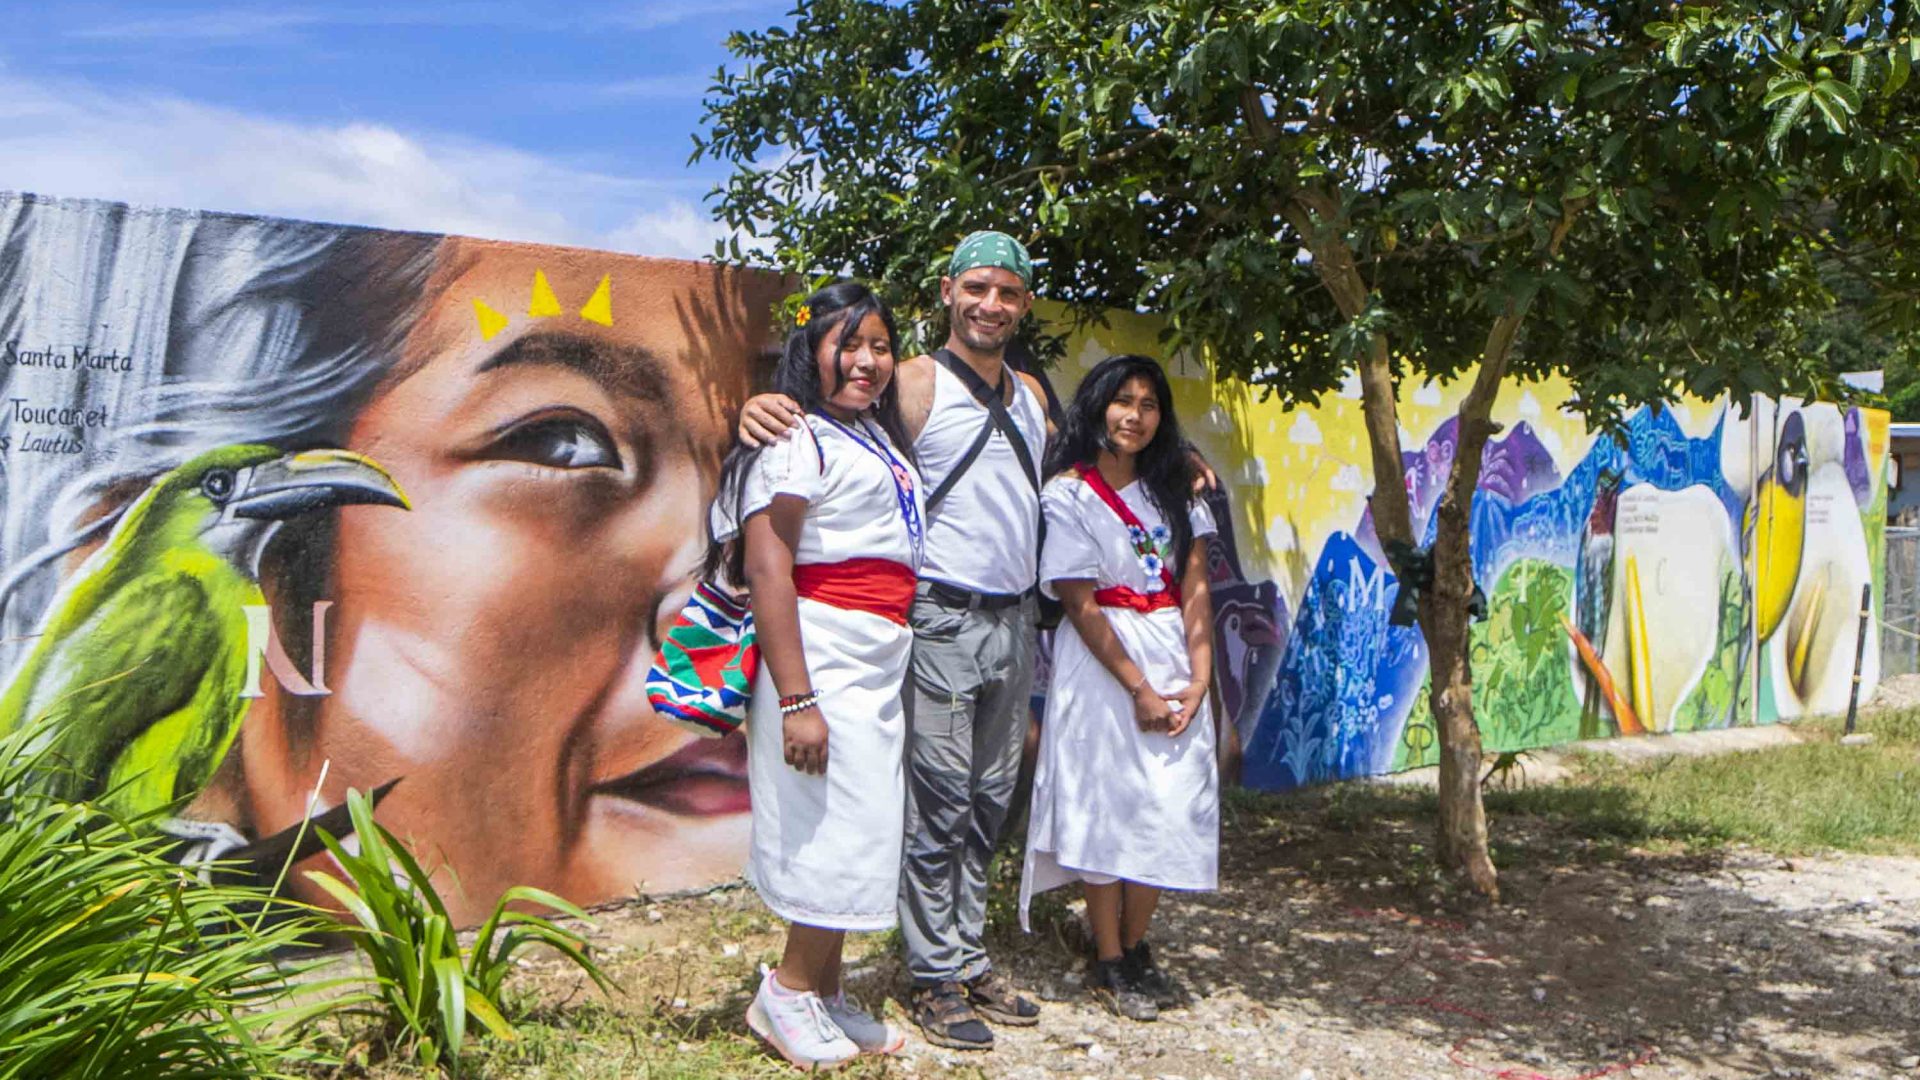 Two local indigenous women stand with a man in front of a painted mural.